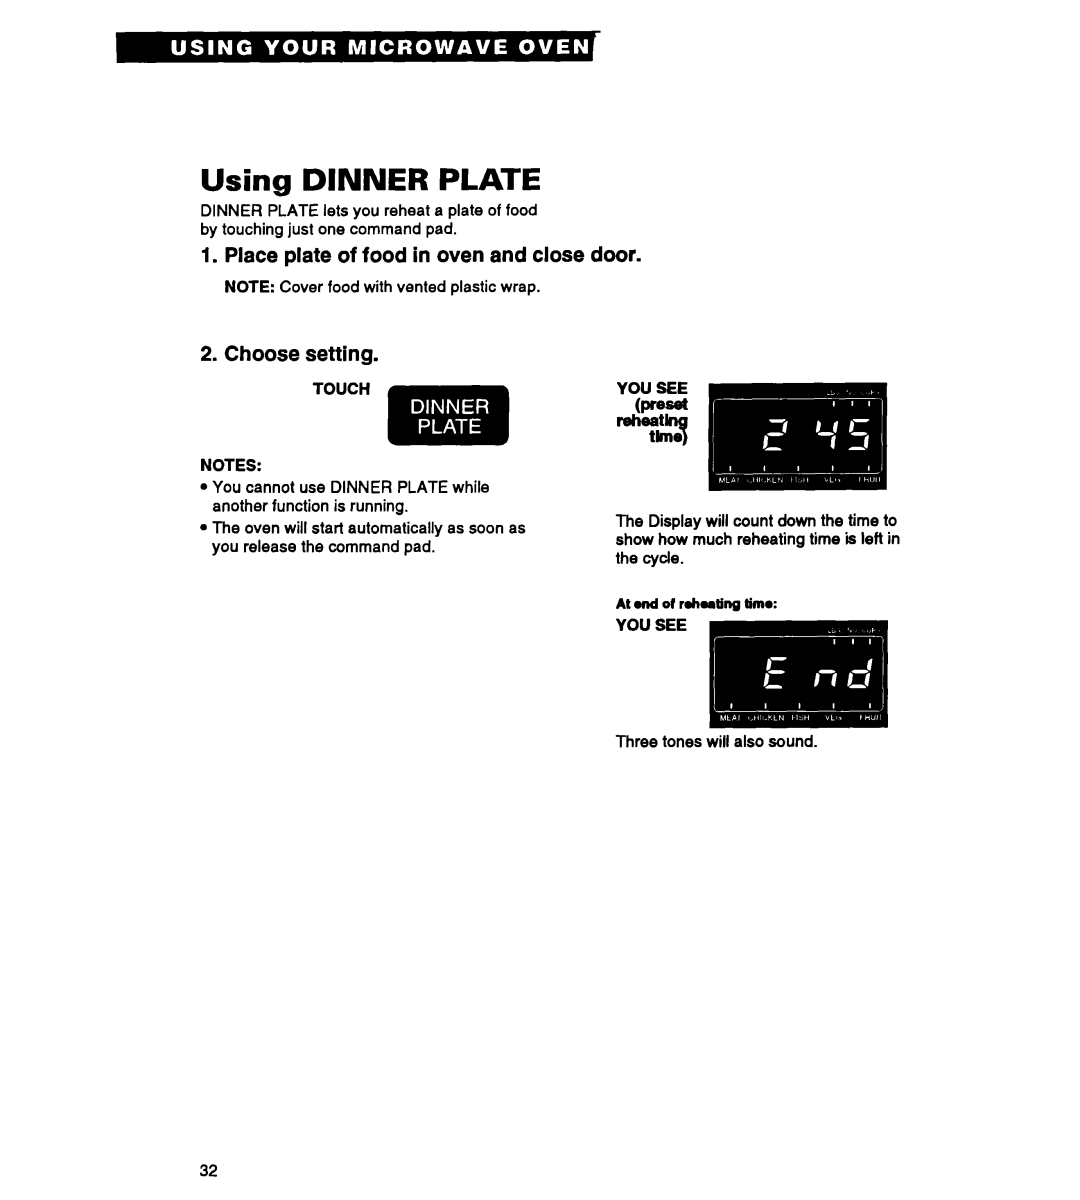 Whirlpool MT2070XAB, MT3090XAQ/B warranty Using DINNER PLATE, Place plate of food in oven and close door, Choose setting 